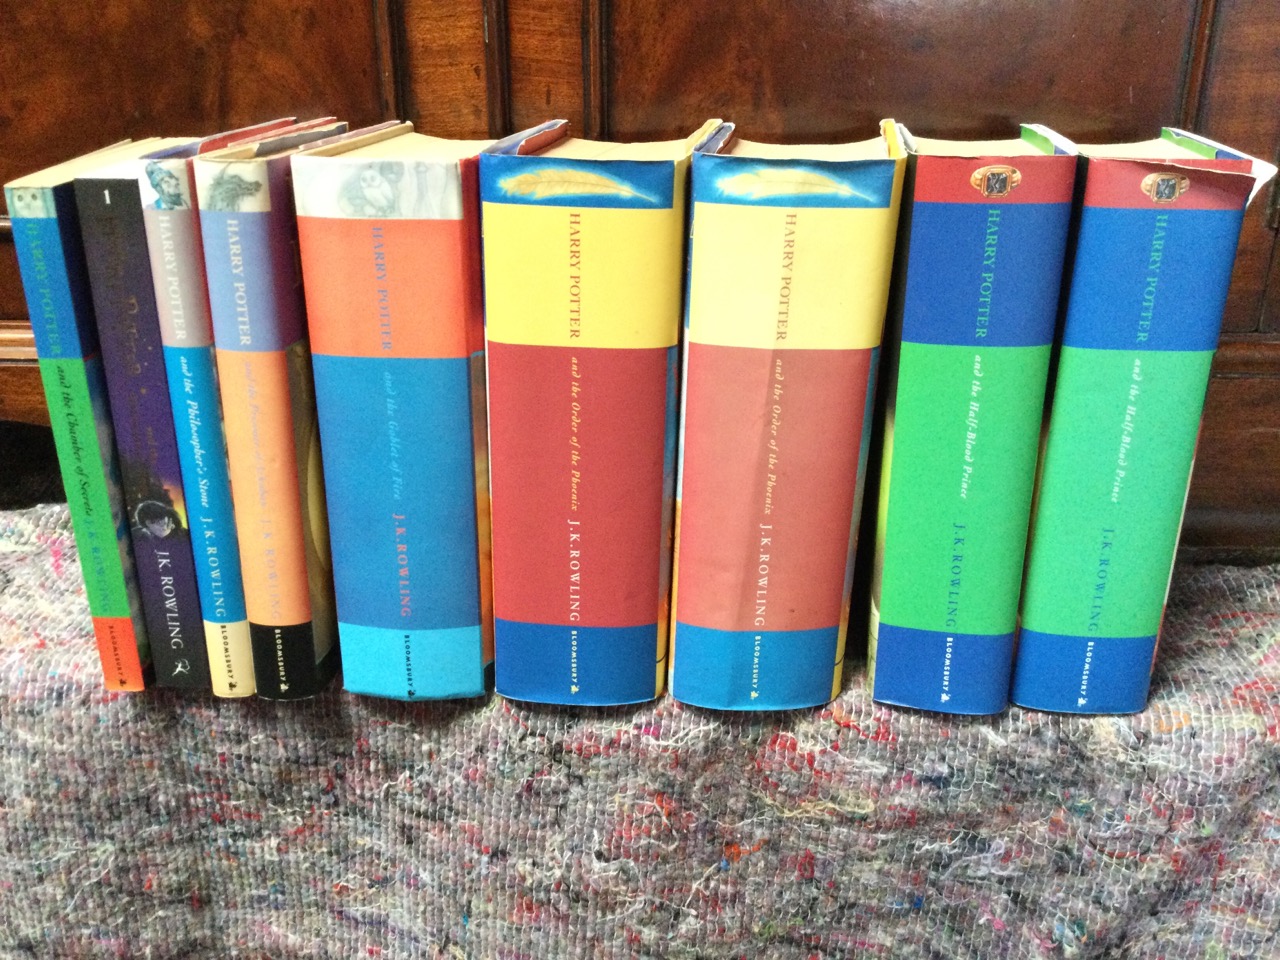 A run of JK Rowling Harry Potter books including first editions - seven hardbacks with covers and - Image 2 of 3